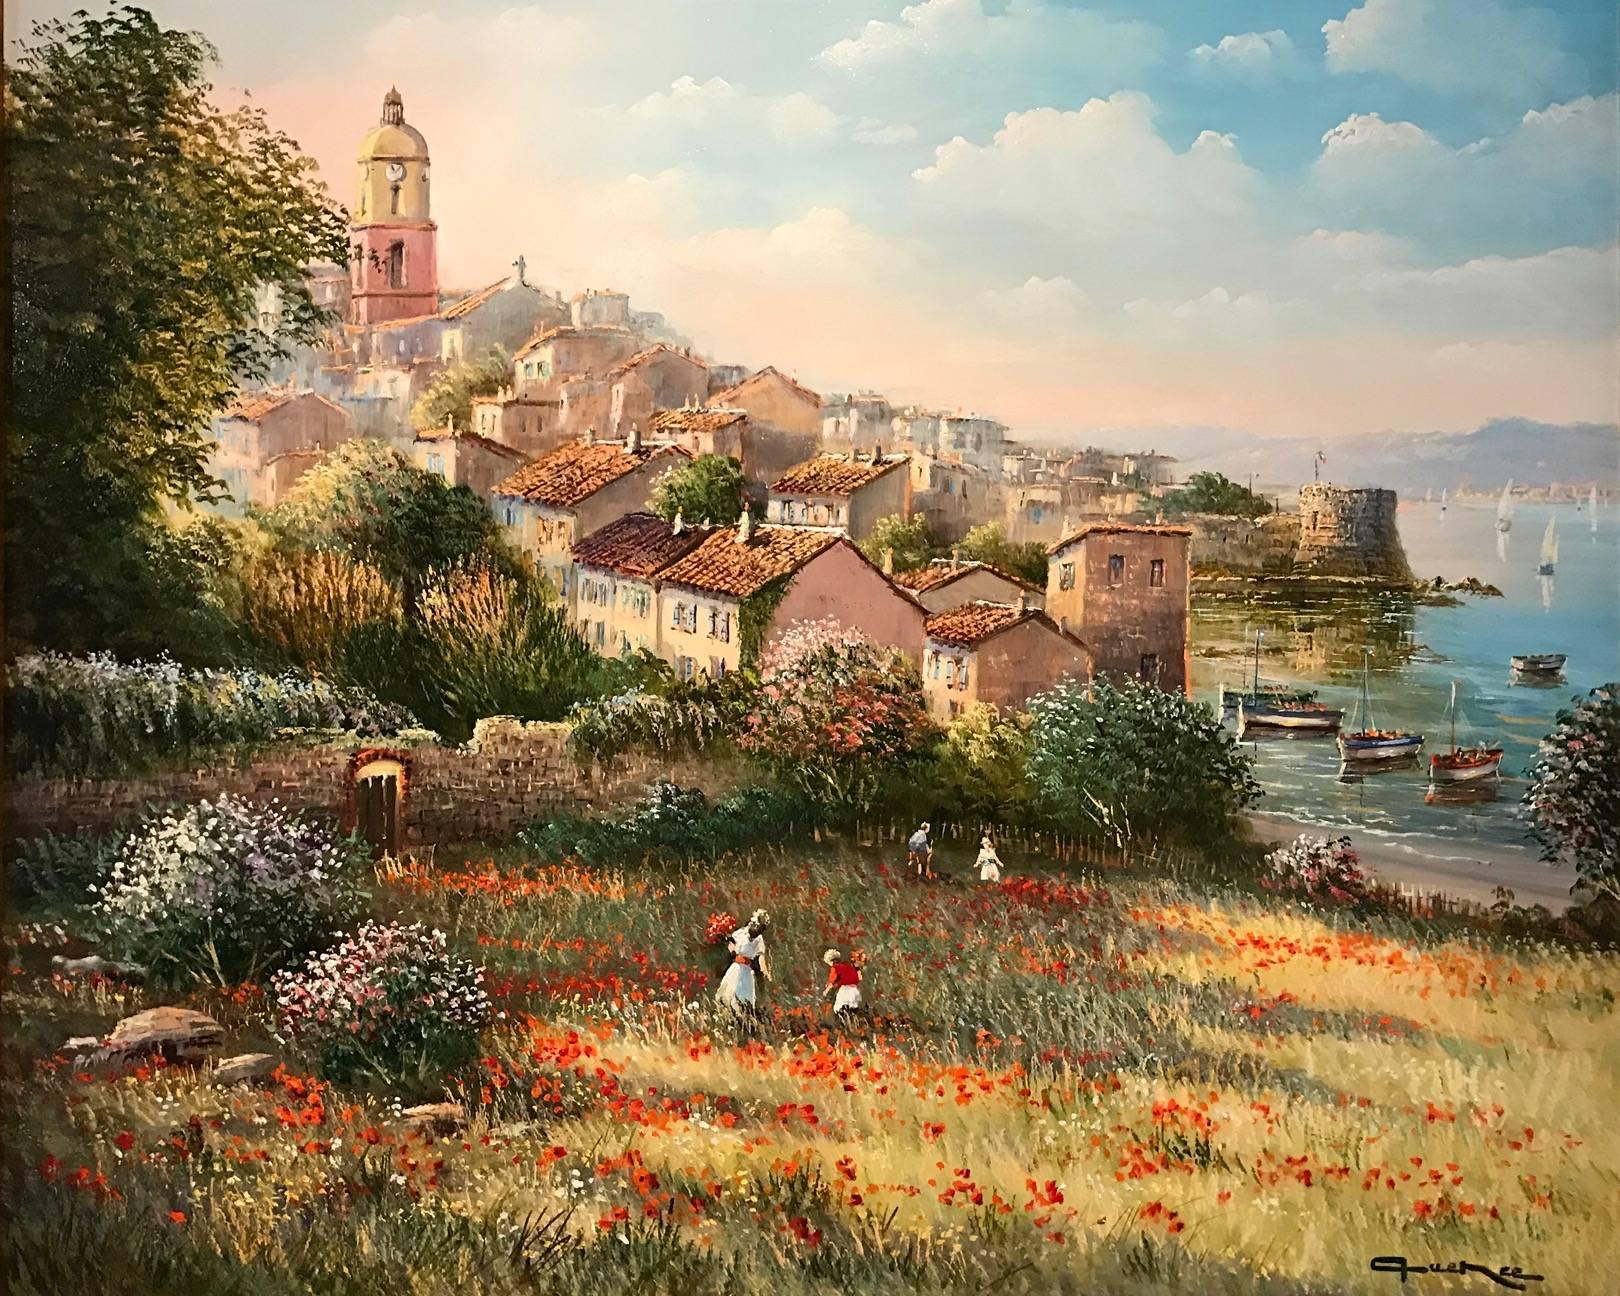 Raymond Quence Landscape Painting - St. Tropez Poppy Fields & Old Town - Large French Impressionist Oil Painting